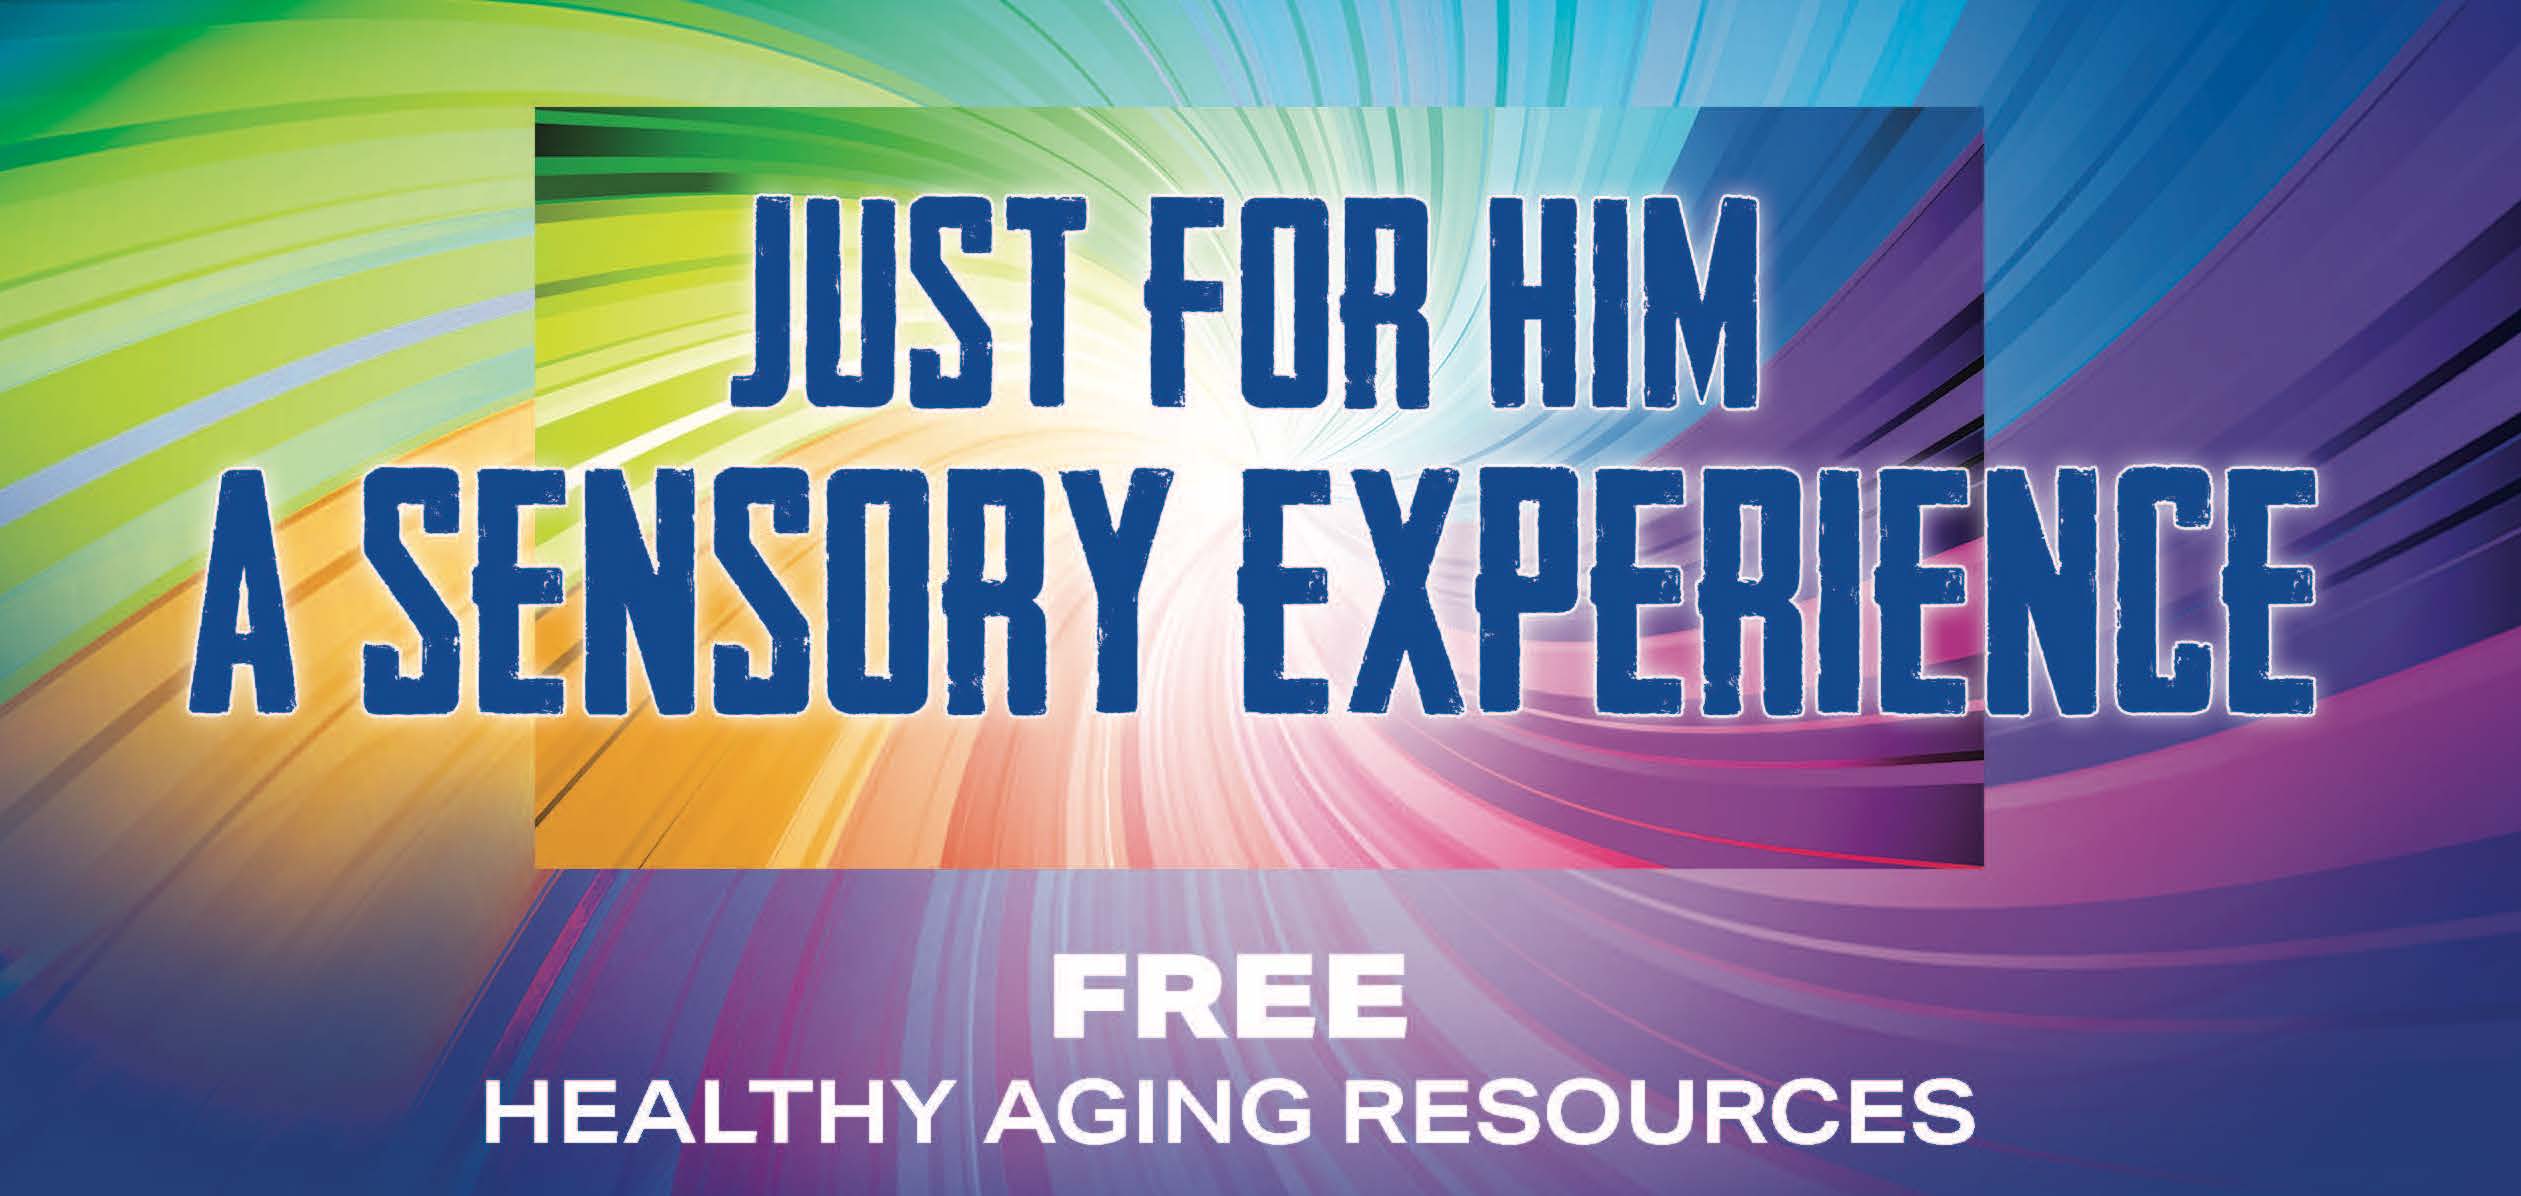 Just for Him: A Sensory Experience with Free Healthy Aging Resources